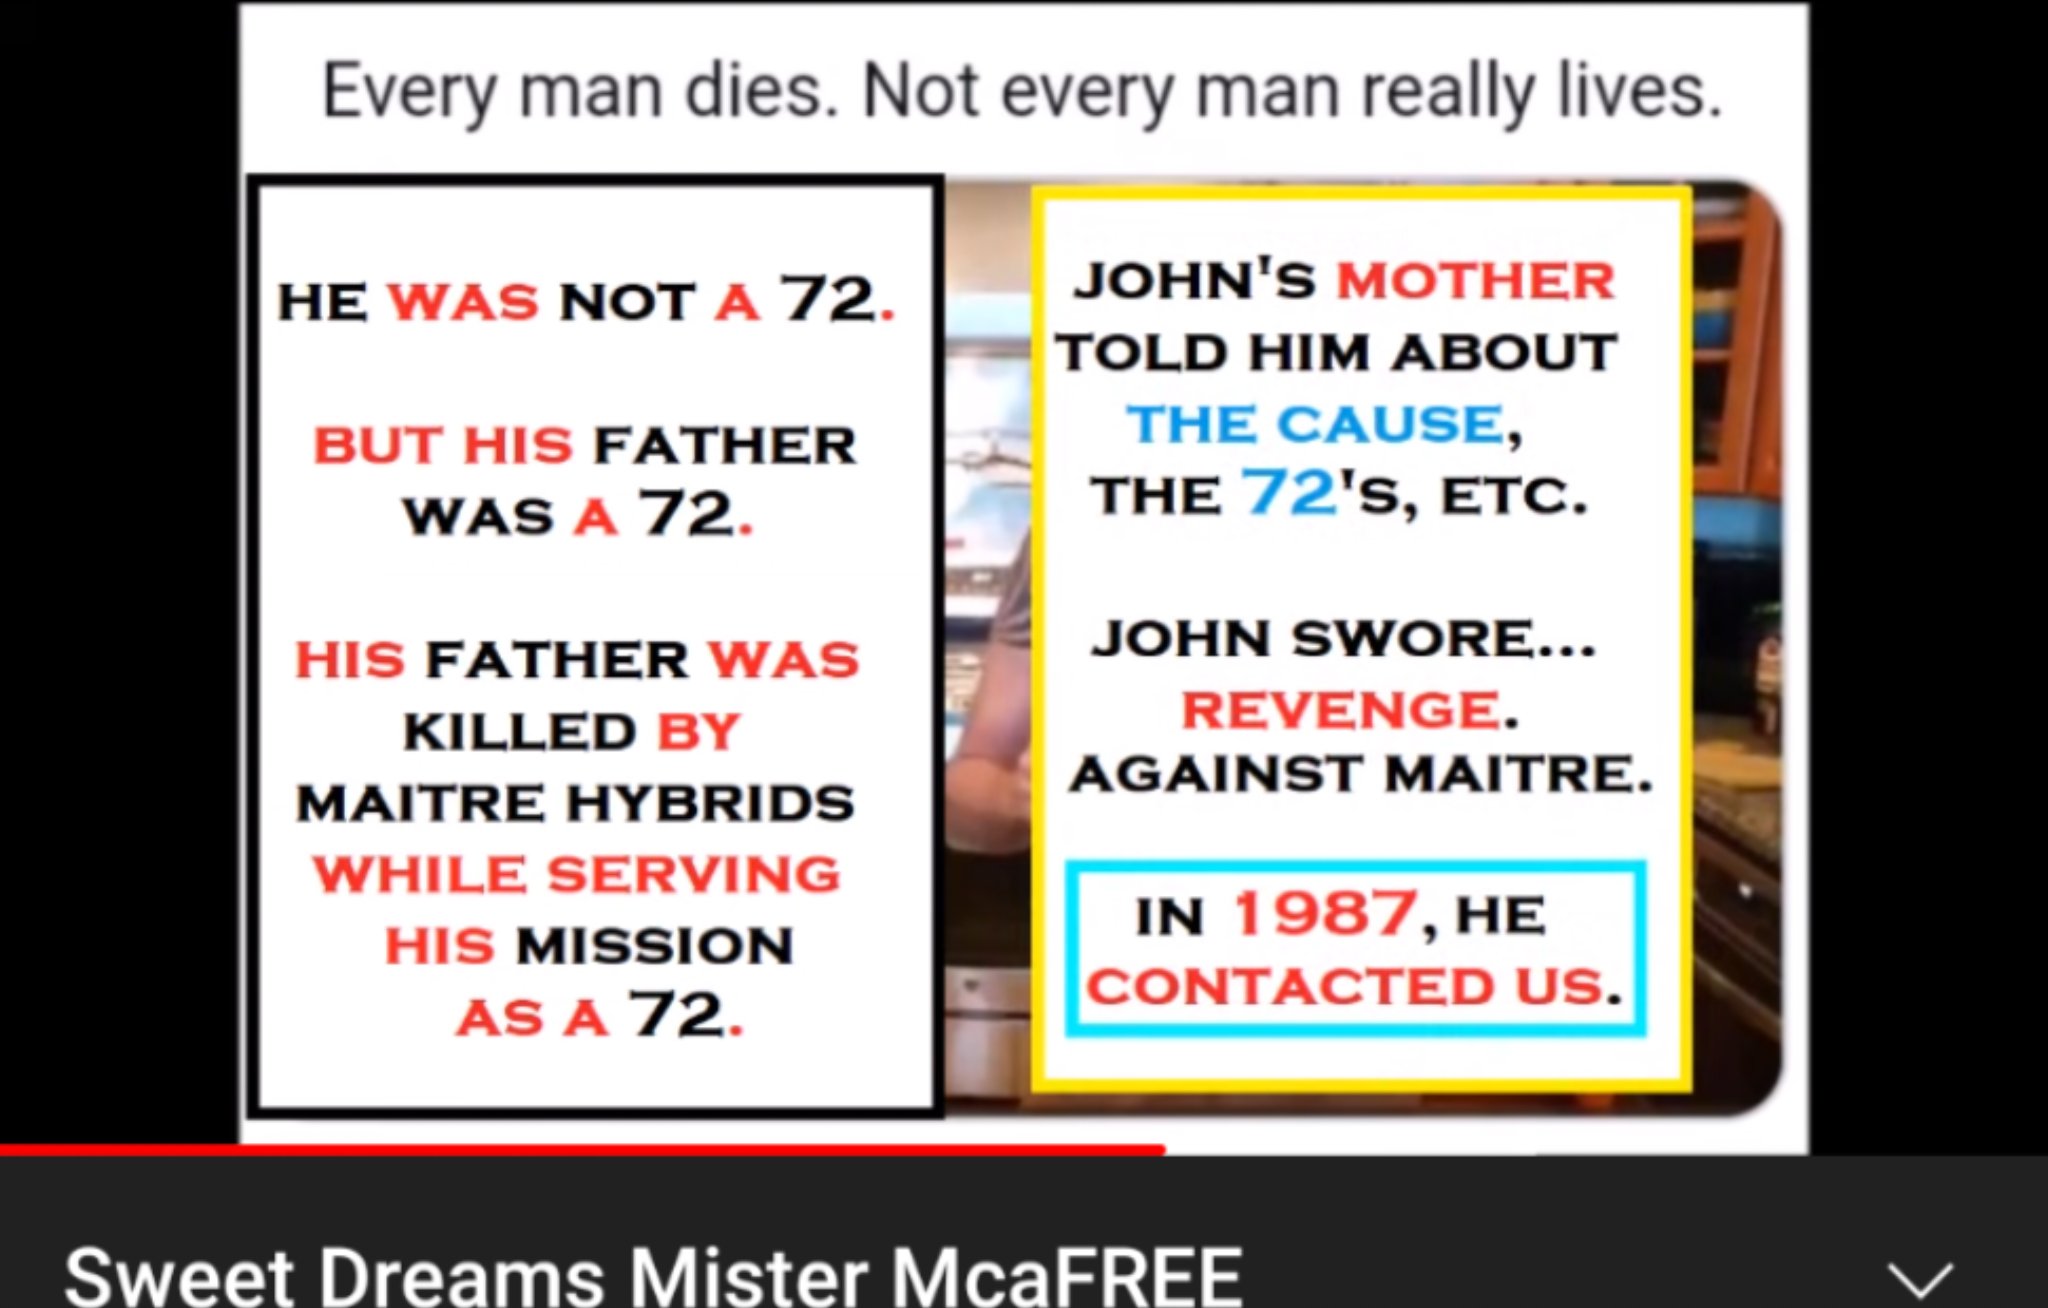 John McAfee Found Dead in Prison Cell after US Extradition Approved E5zX2_HXMAIetQ2?format=jpg&name=large